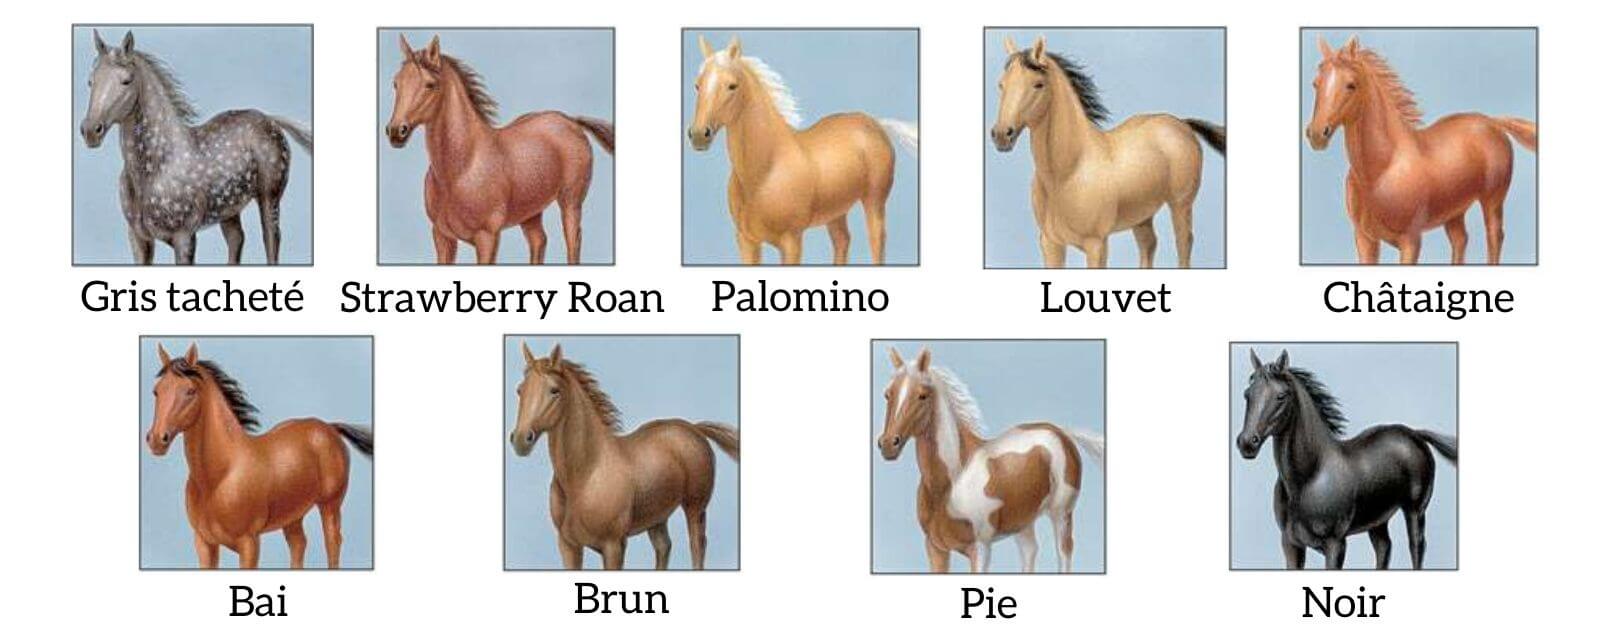 The Horse's Dresses